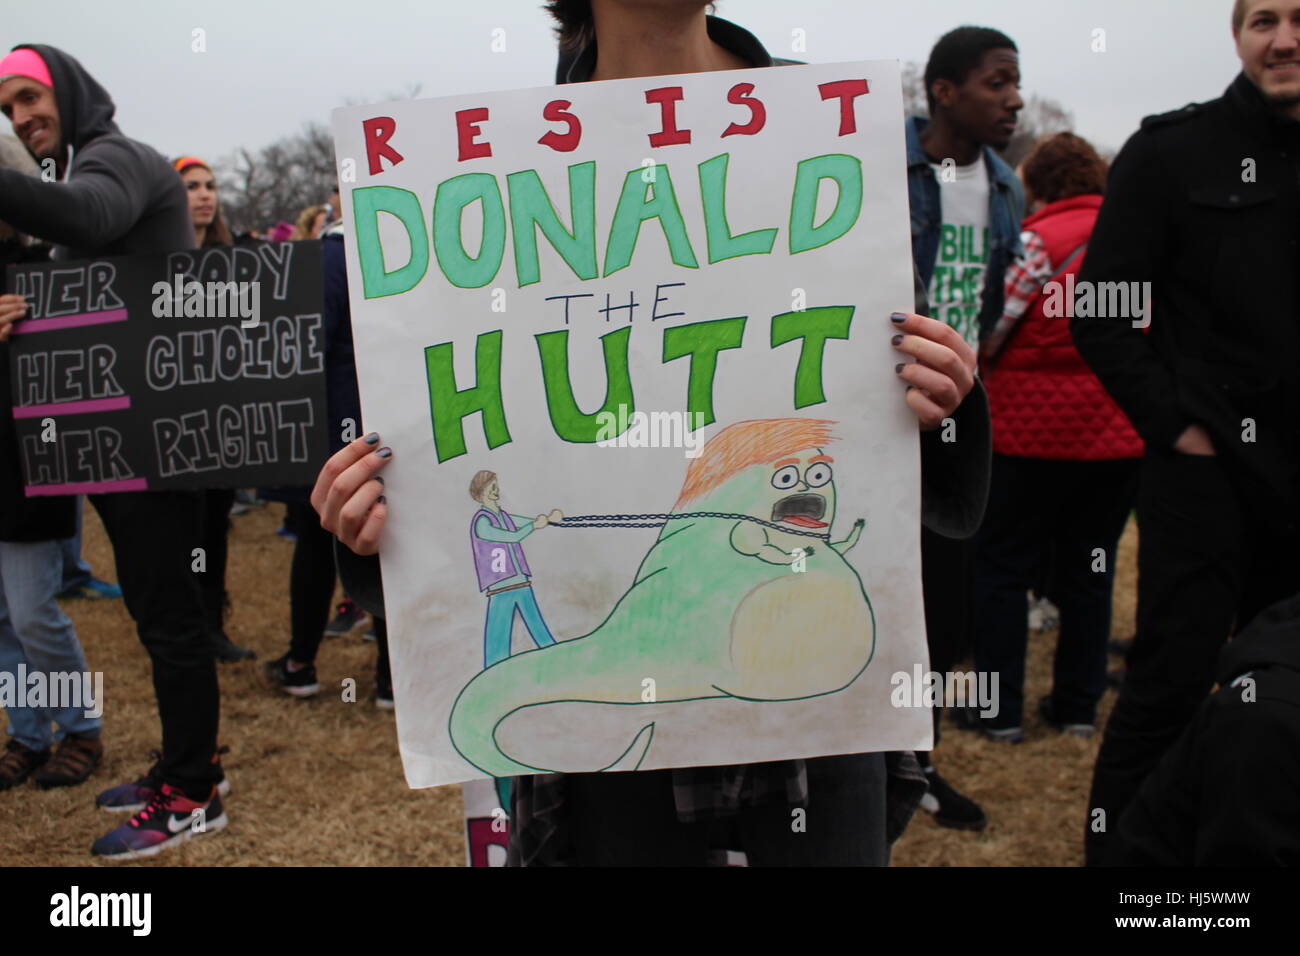 District of Columbia, USA. 21 Jan, 2017. A protester holds a sign depicting President Donald Trump as Star Wars character Jabba the Hutt being held back by a chain with the caption 'RESIST DONALD THE HUTT'. Stock Photo